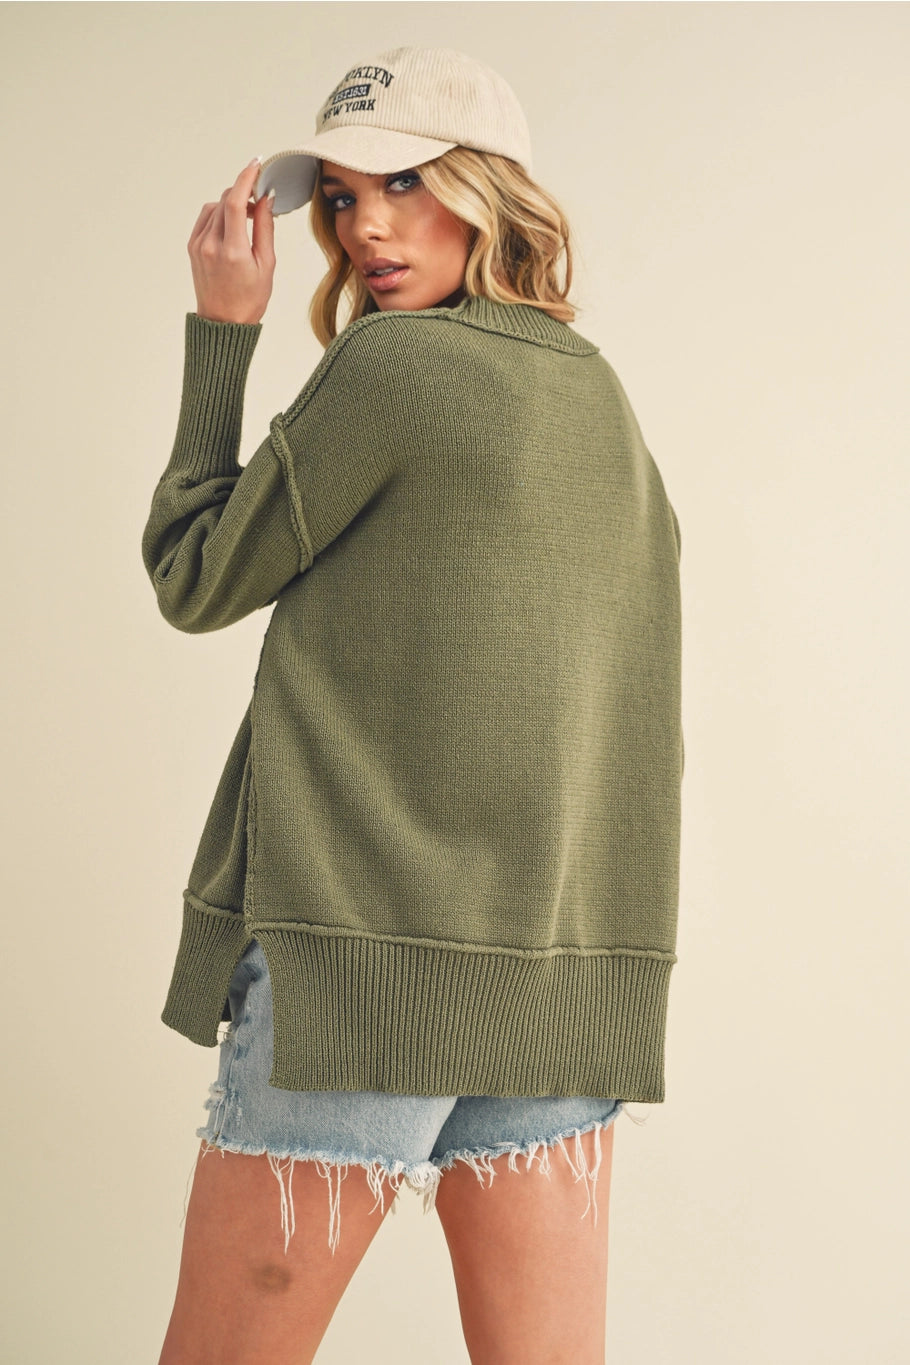 Ribbed Knit Sweater in Olive Green